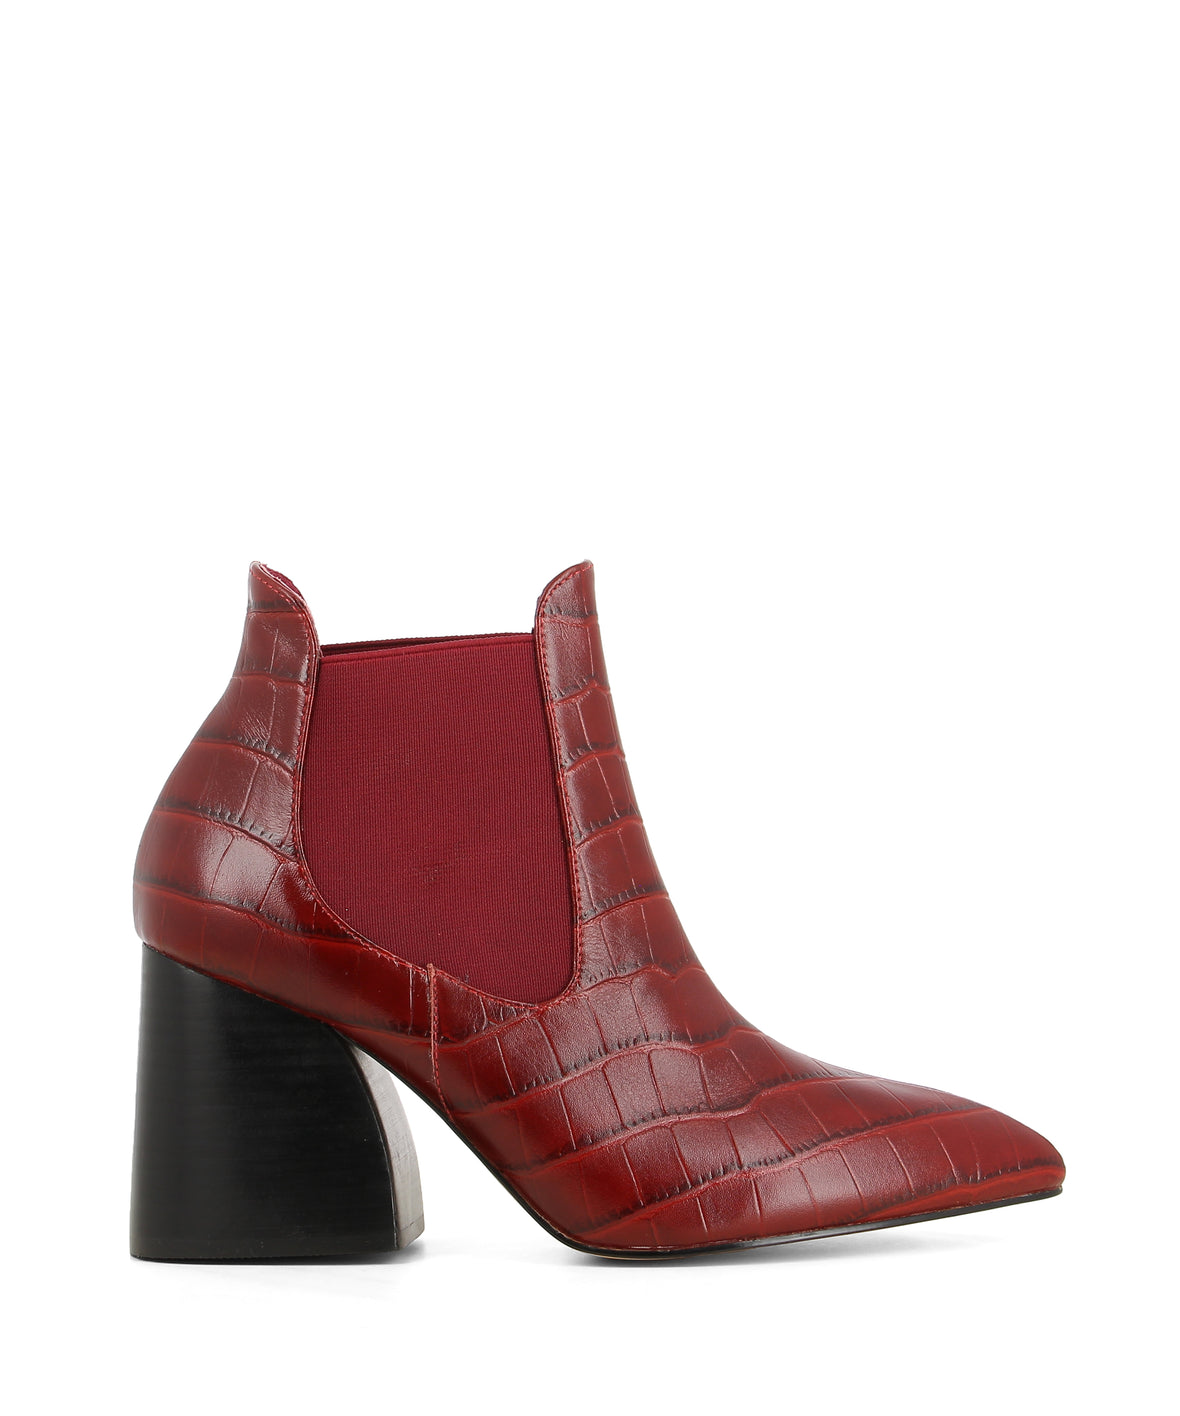 Red Croc Leather Ankle Boots - Women's 